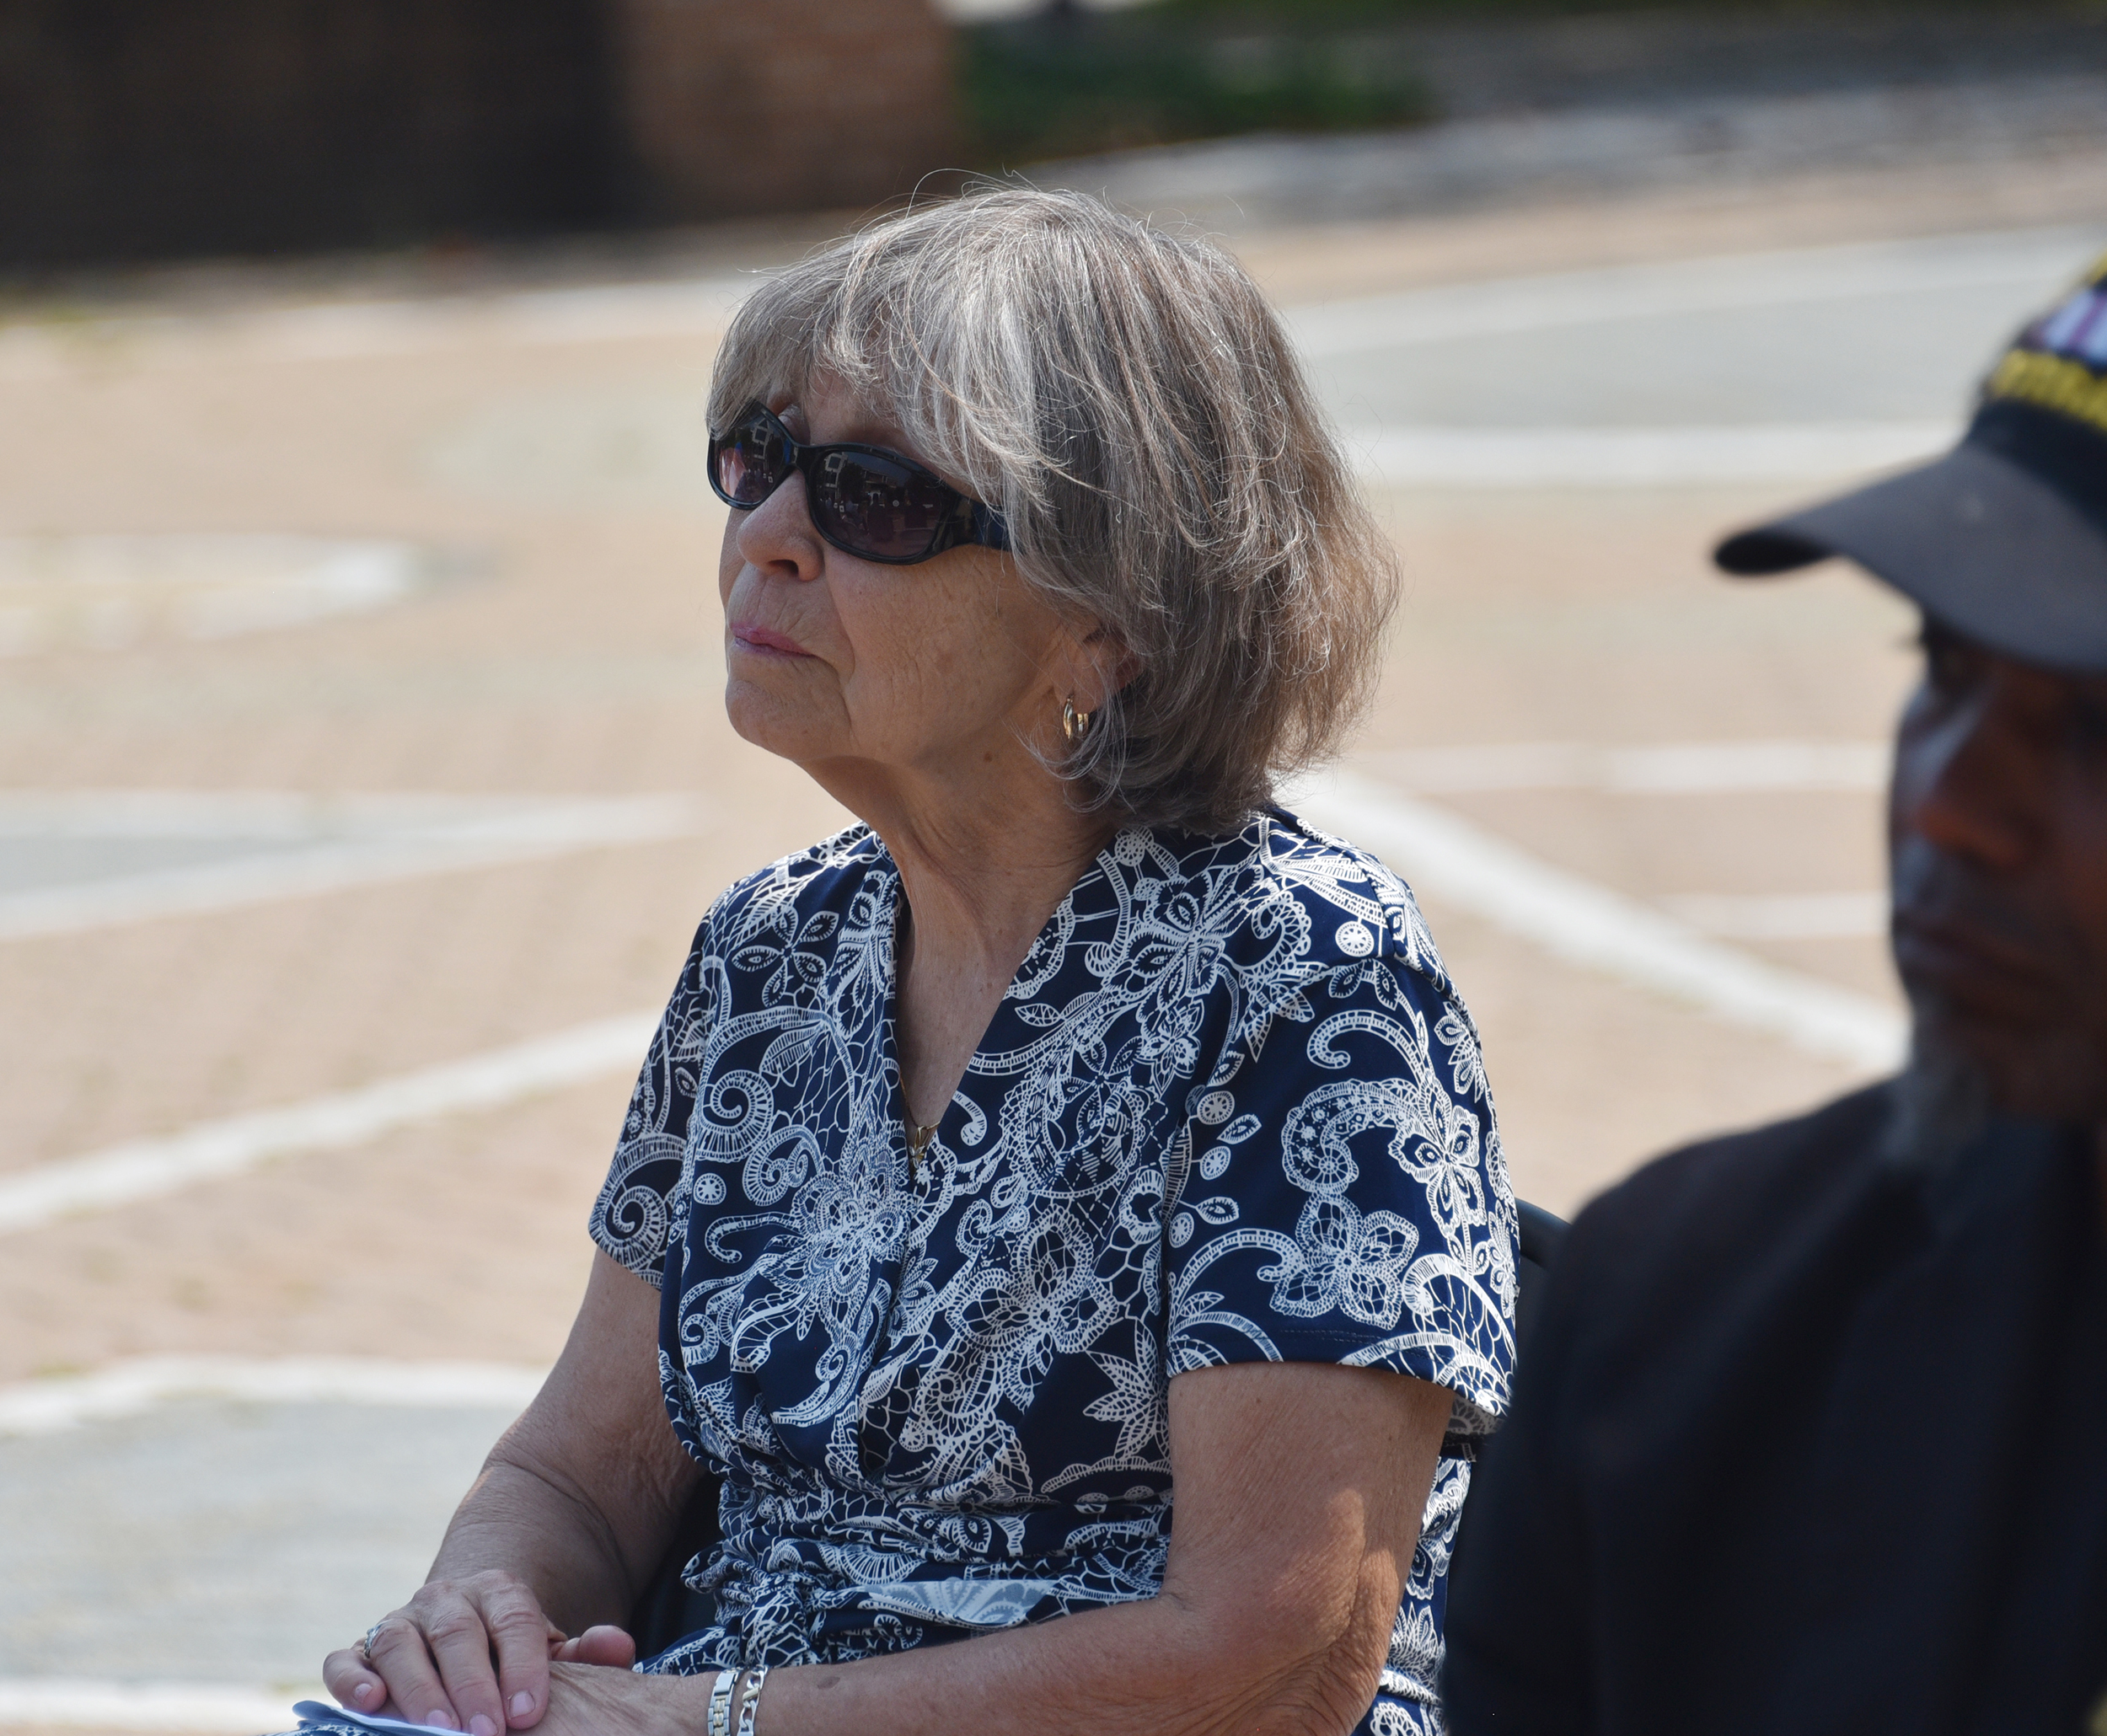 Mrs. JoAnn Coons, widow of Del State Aviation Program founder Dr. Daniel Coons, also attended the event.